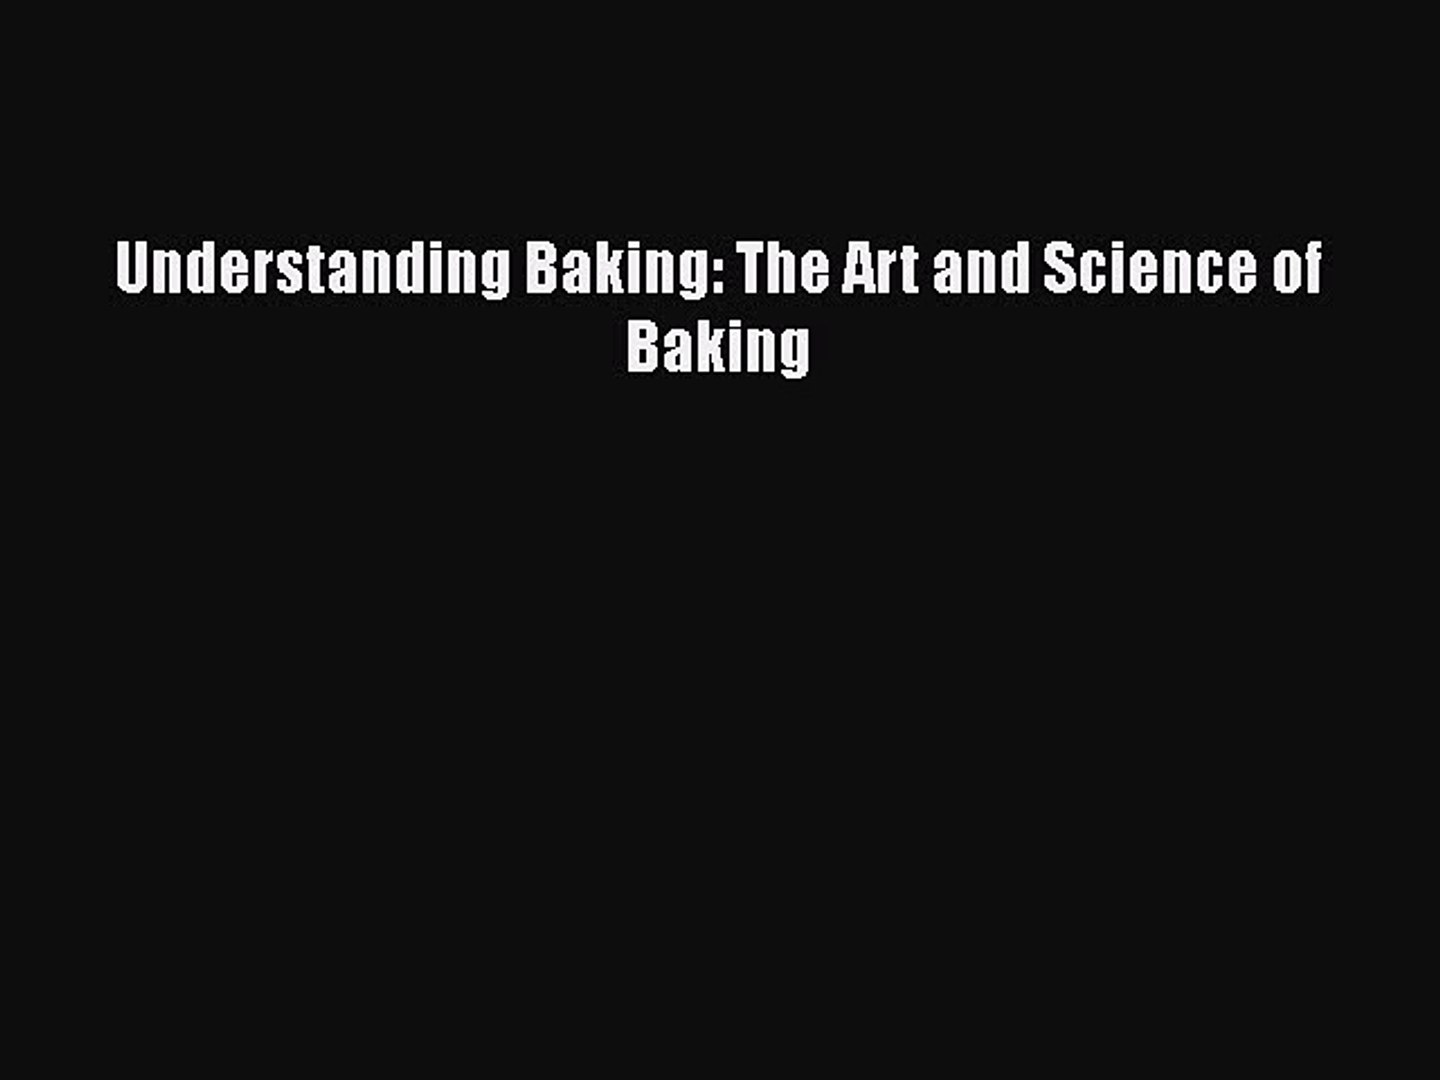 Download Understanding Baking: The Art and Science of Baking PDF Free